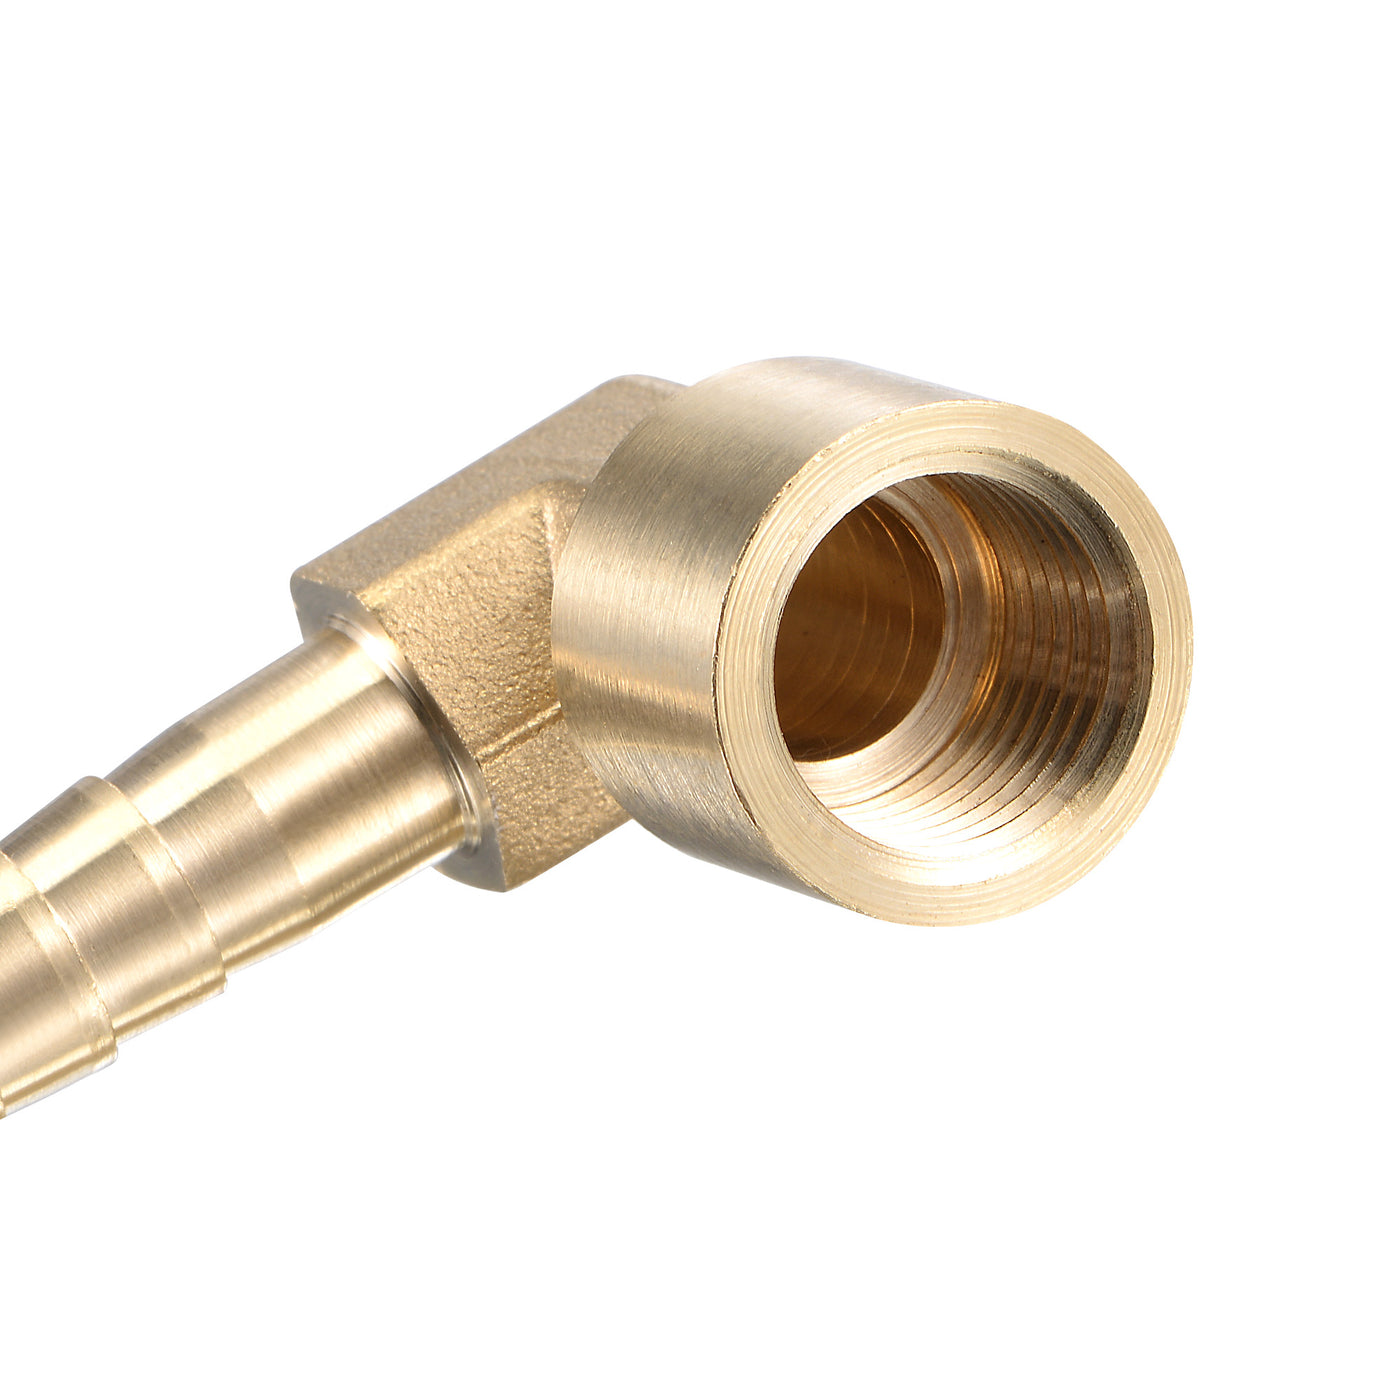 Uxcell Uxcell Brass Hose Barb Fitting Elbow 10mm x G1/4 Female Pipe Connector